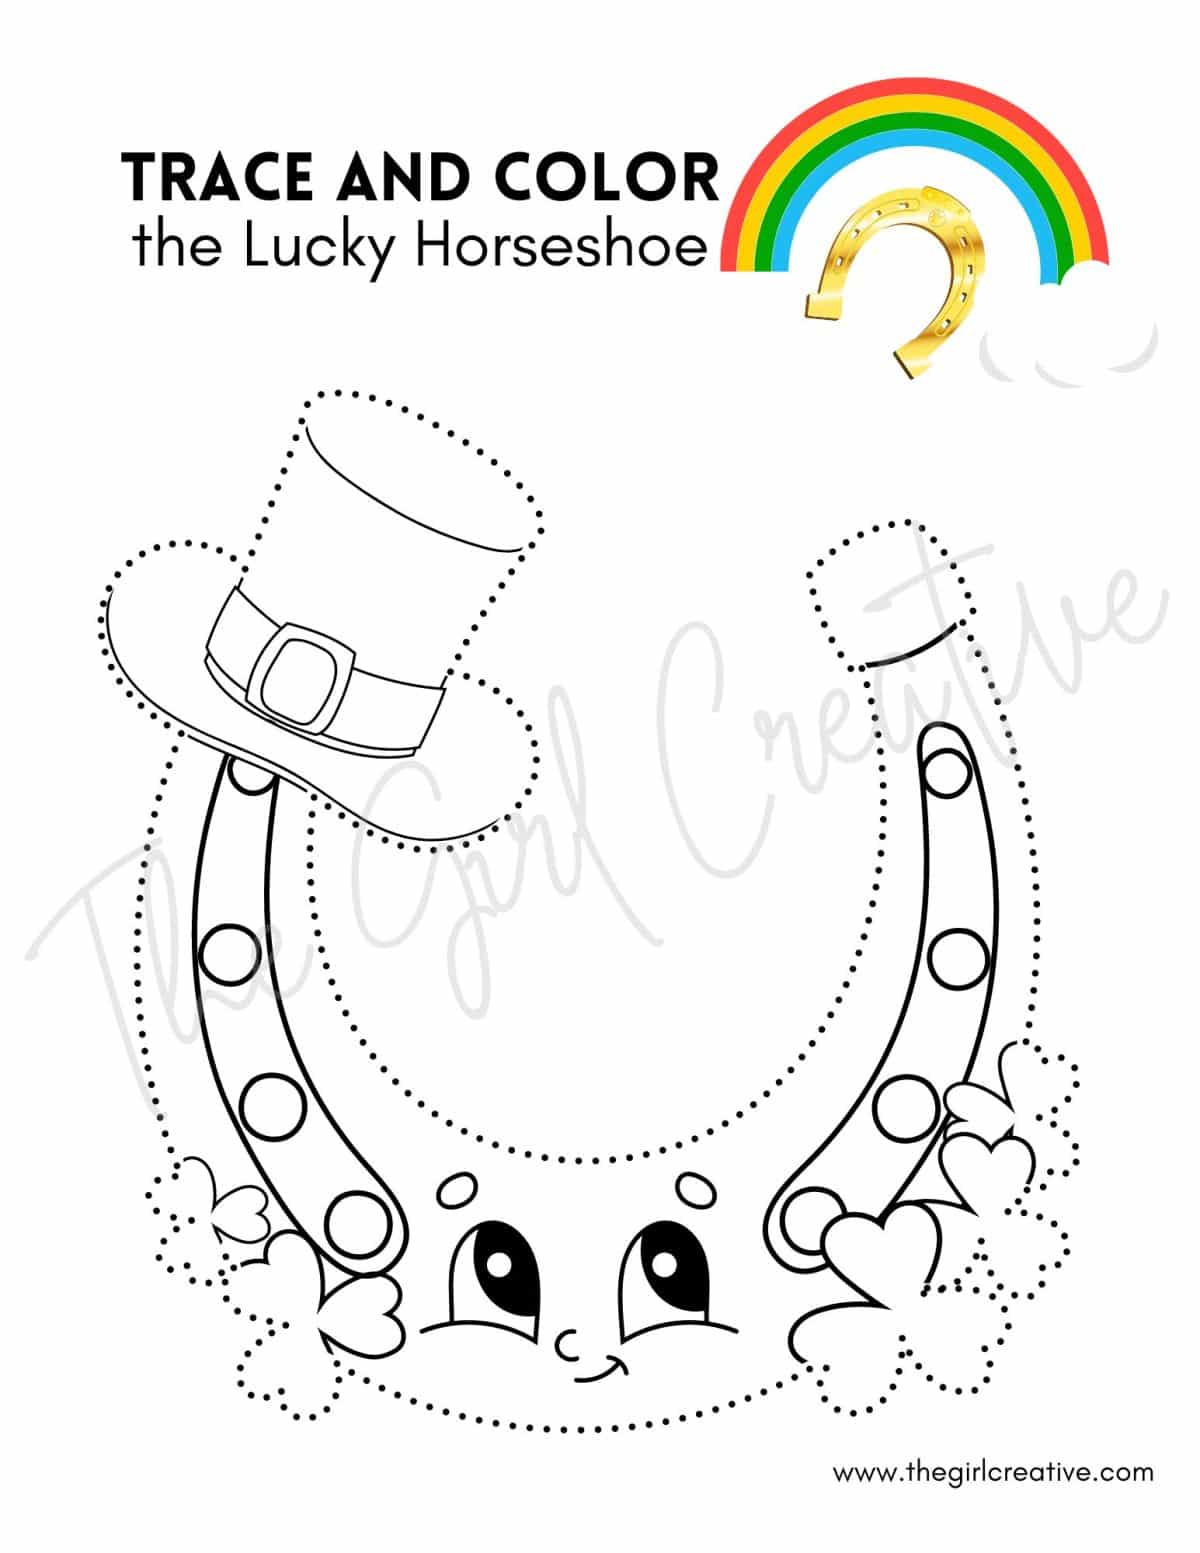 Horseshoe coloring page for St. Patrick's Day